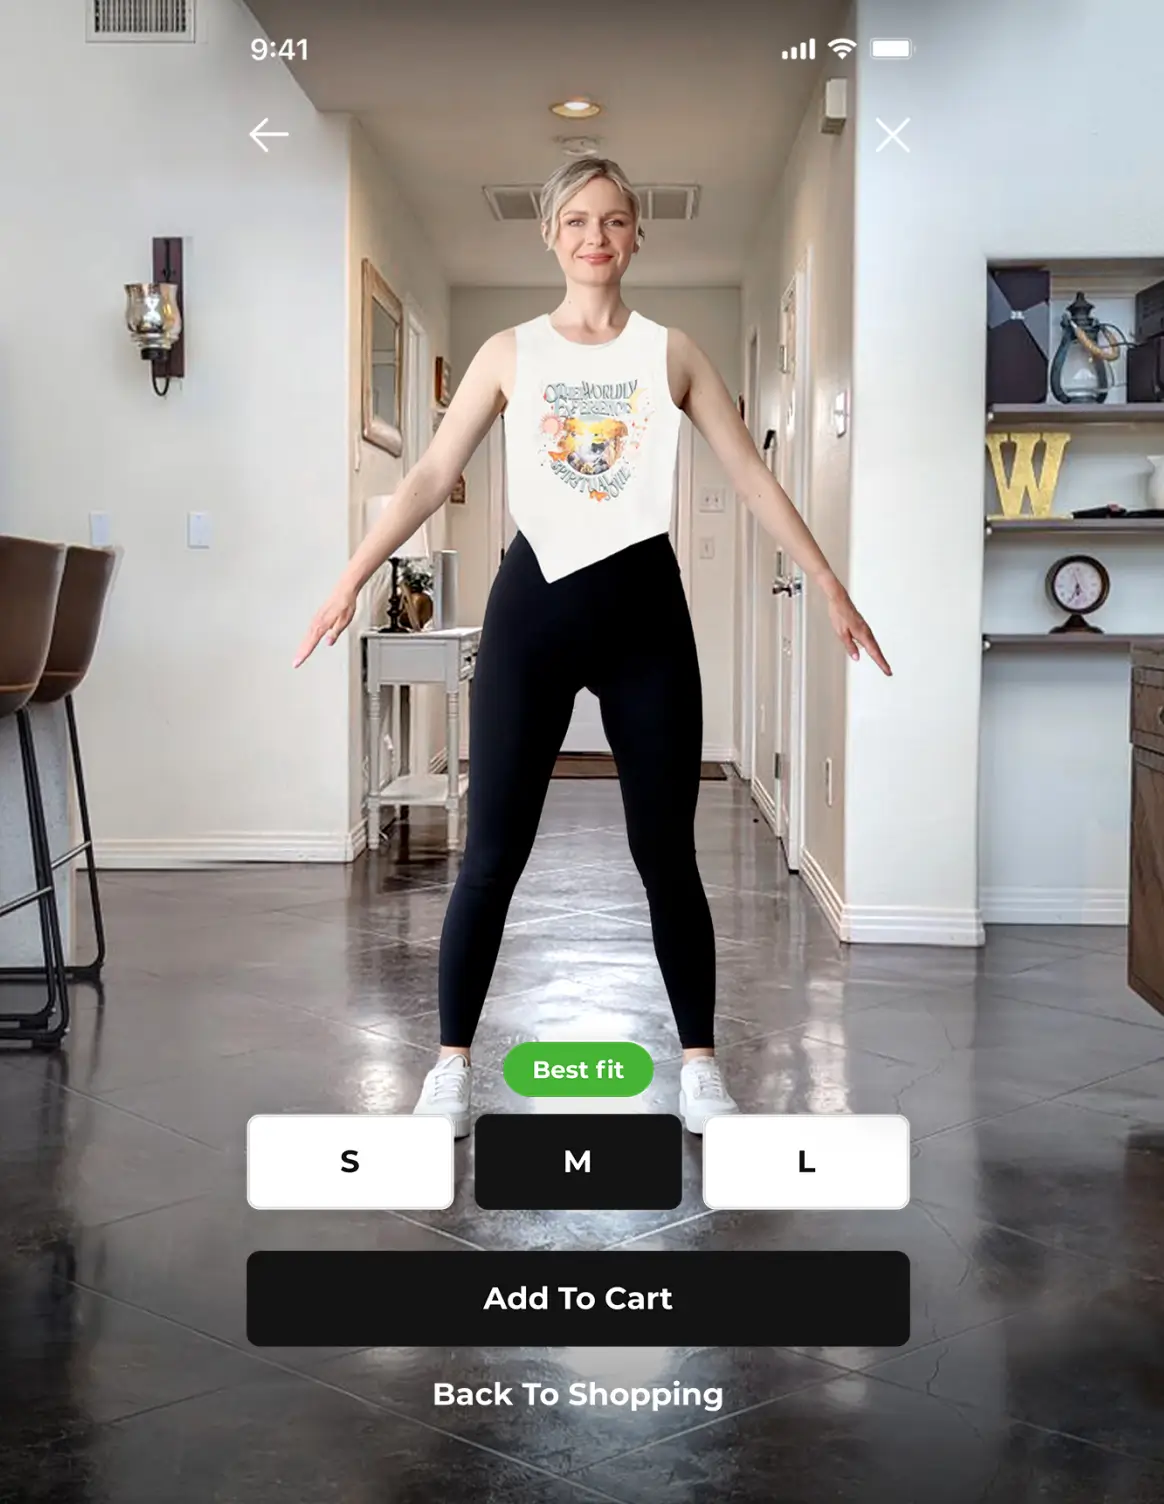 A woman stands in a hallway modeling a white sleeveless top and black leggings. The screen displays size options with buttons labeled S, M, and L, with "Best fit" indicated for size M. A popup provides SEO keywords for better reach and img centers on her as she showcases the outfit.